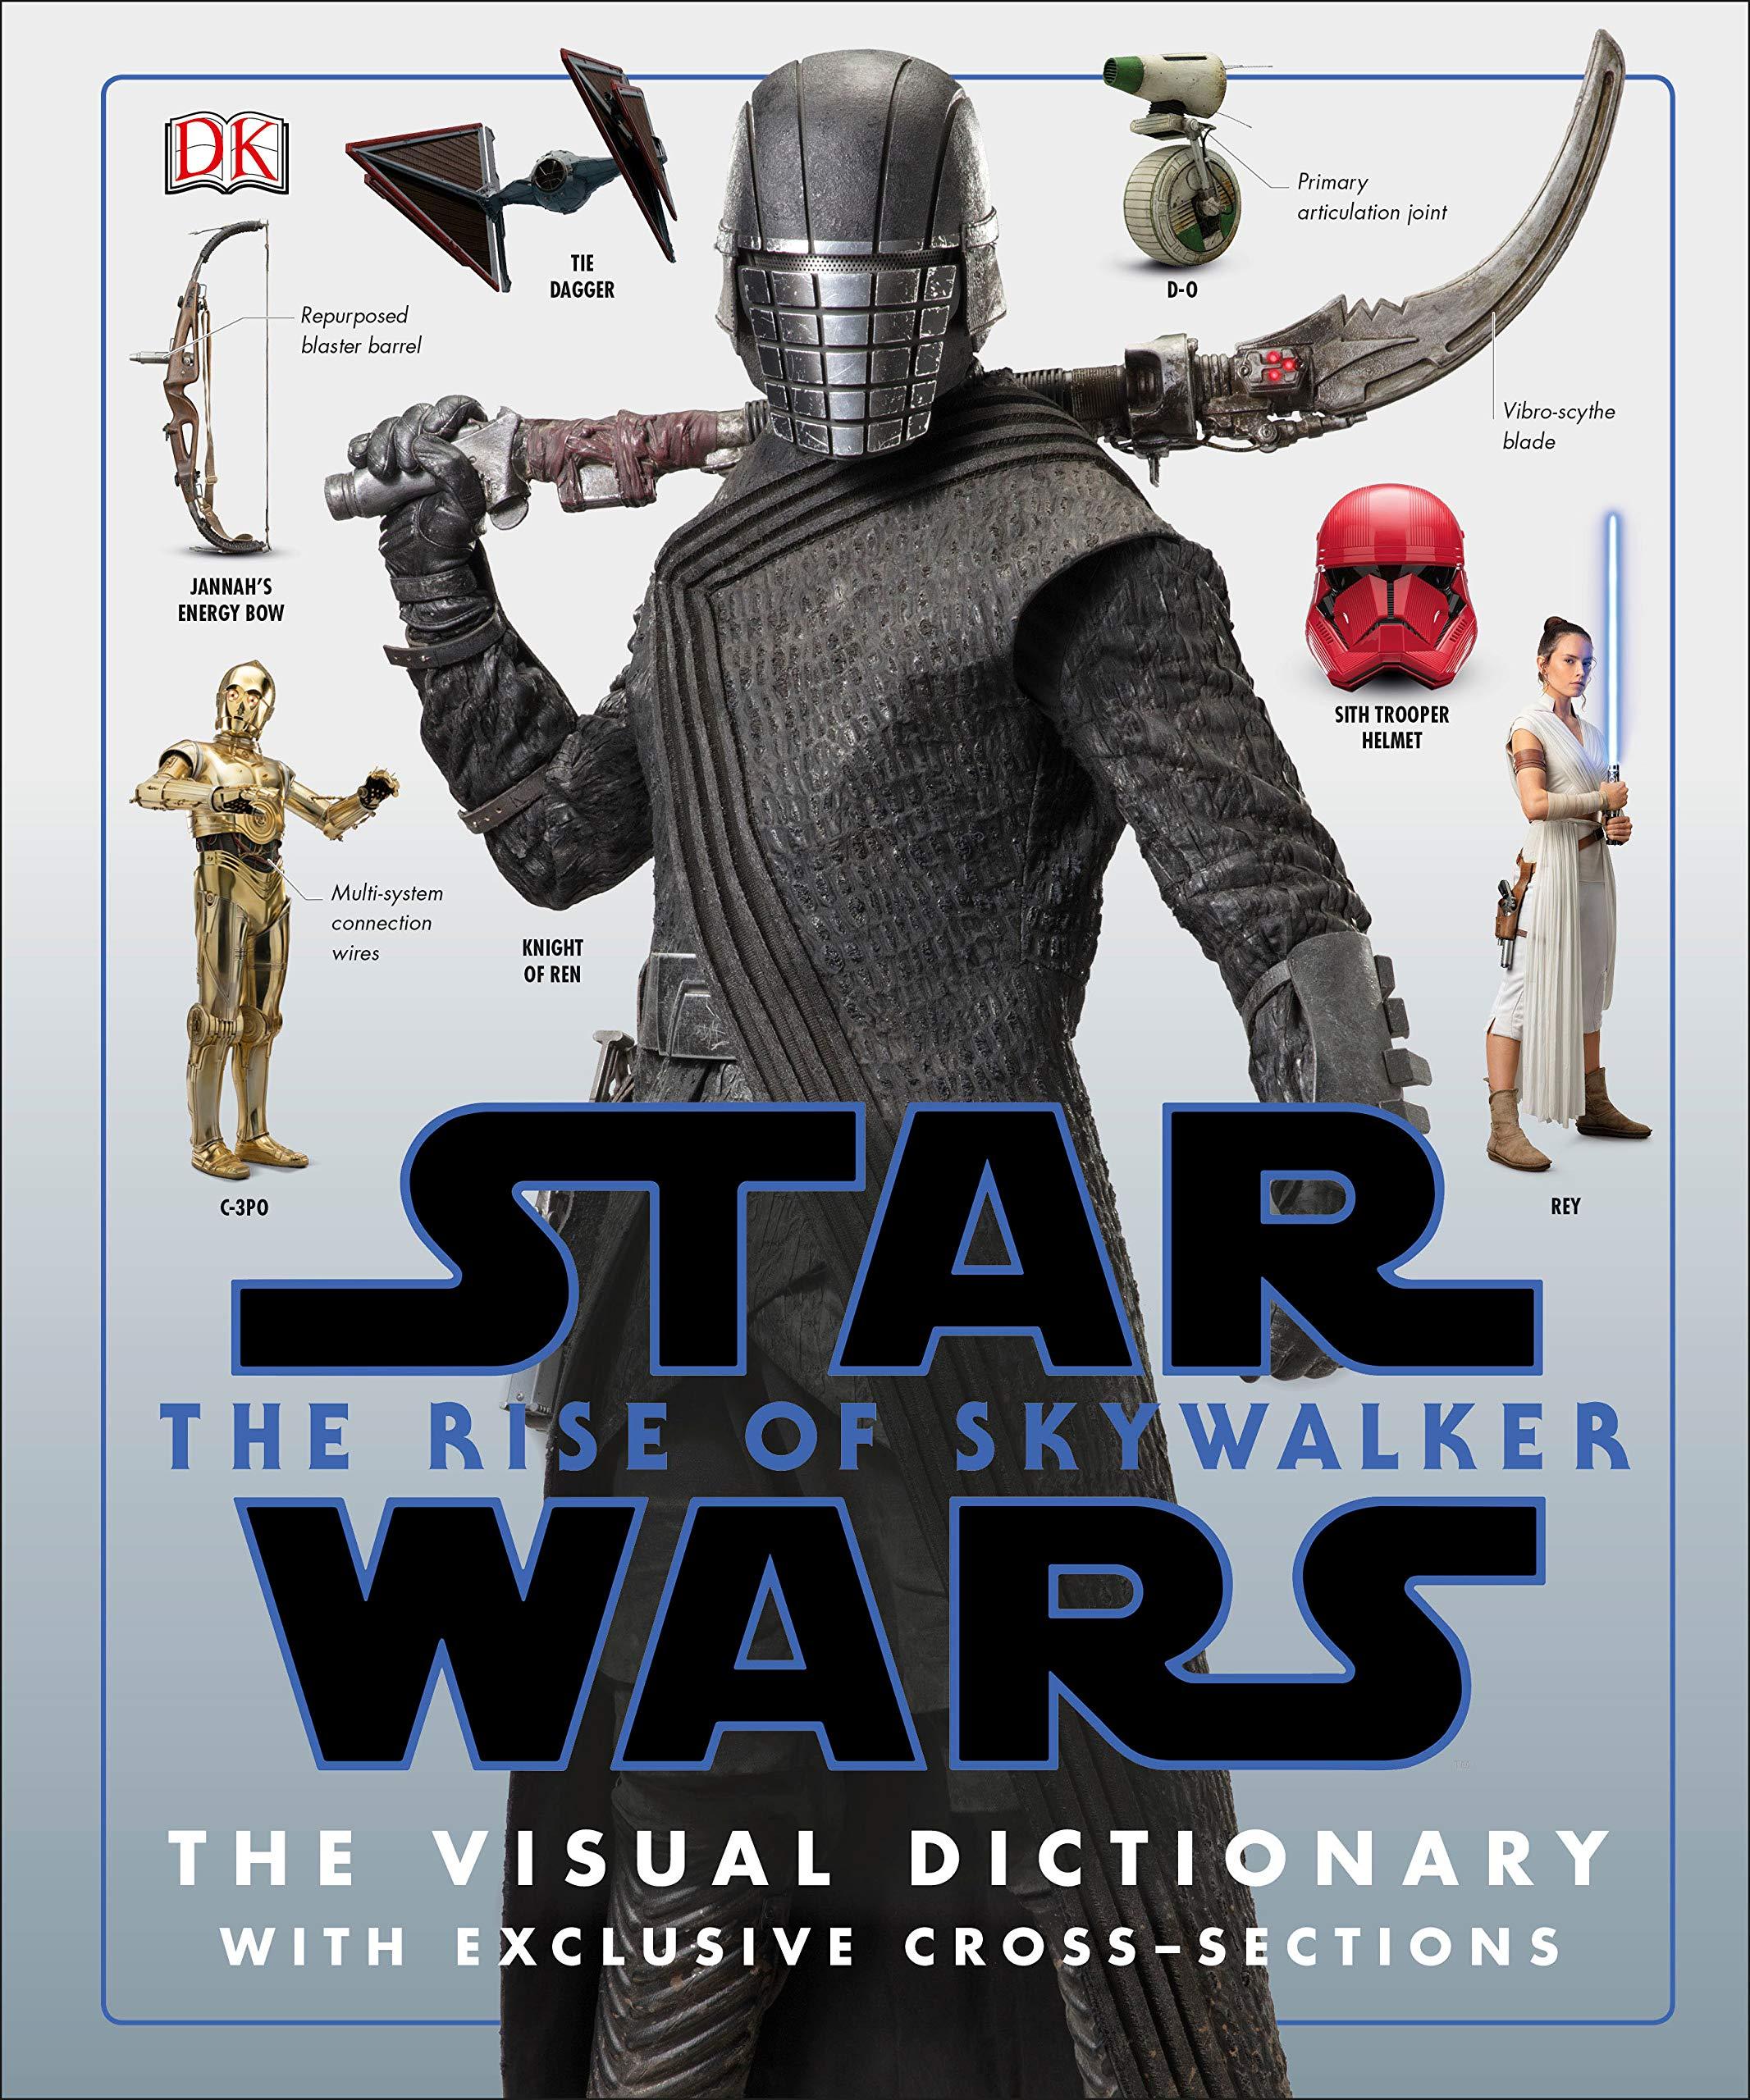 Star Wars The Rise of Skywalker The Visual Dictionary: With